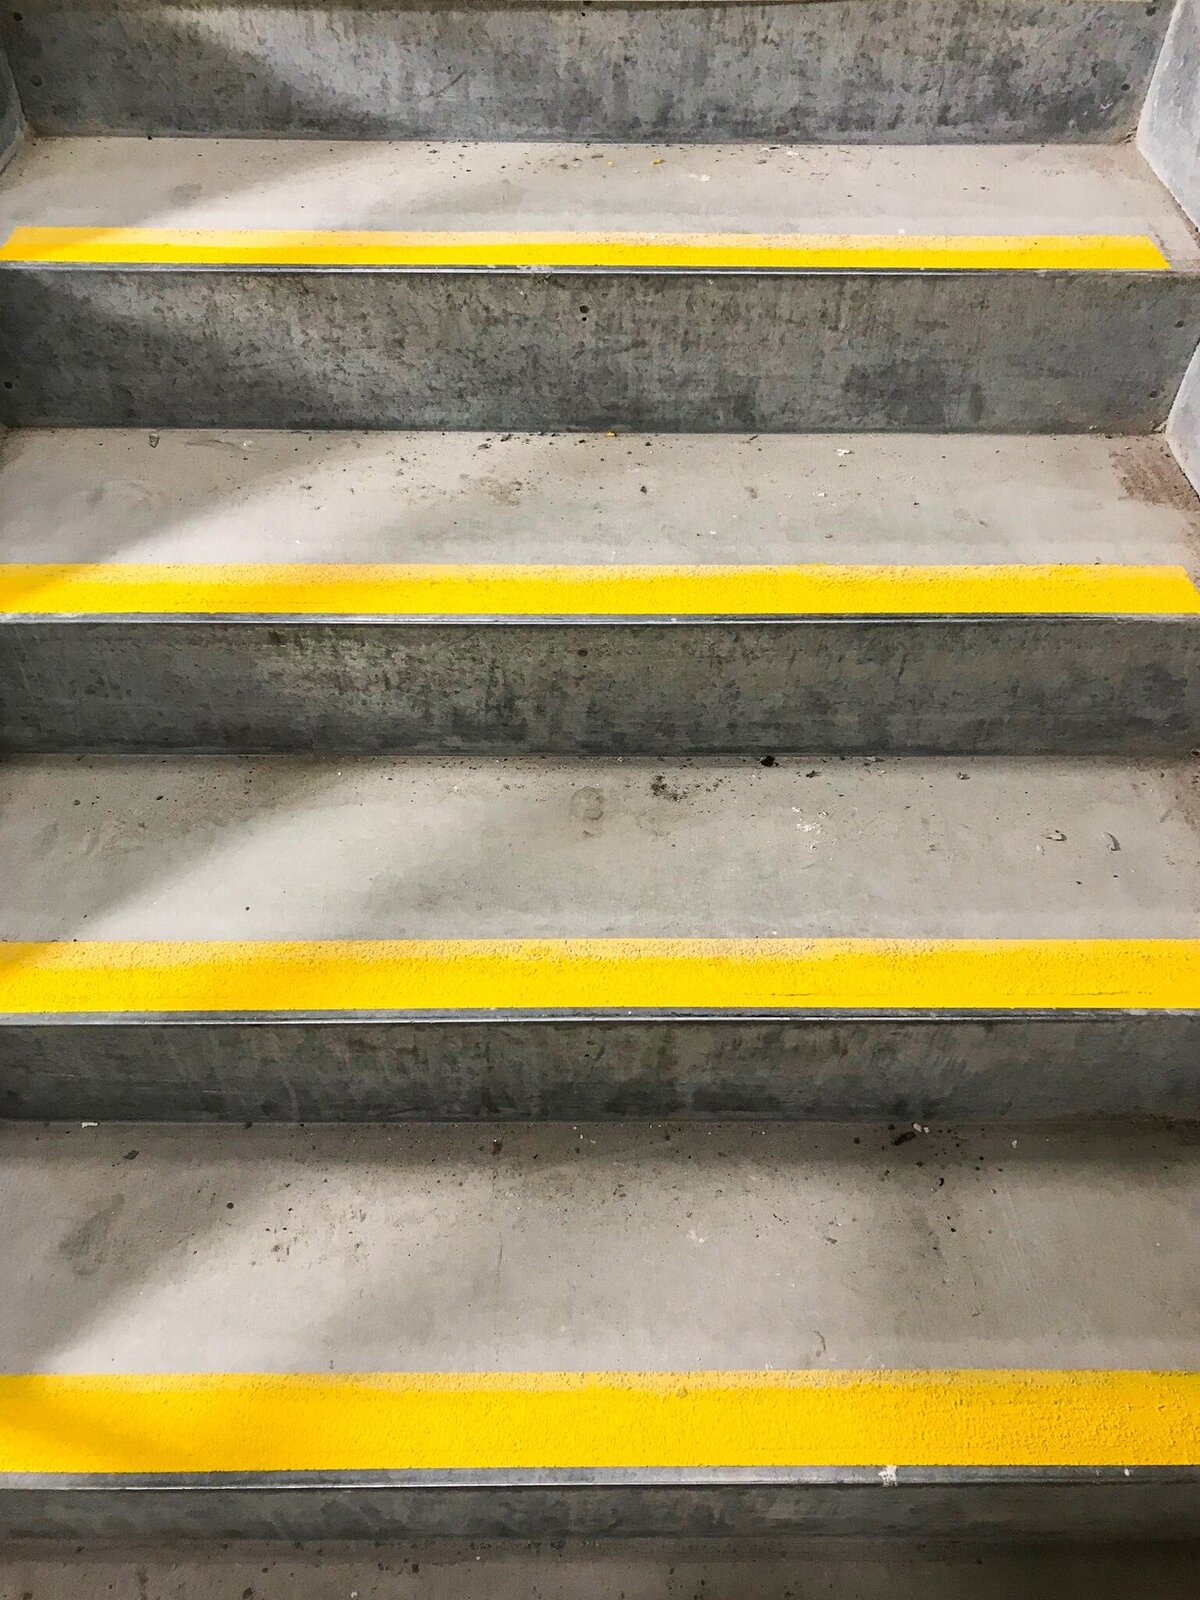 Yellow stair nosing applied to emergency stair wells